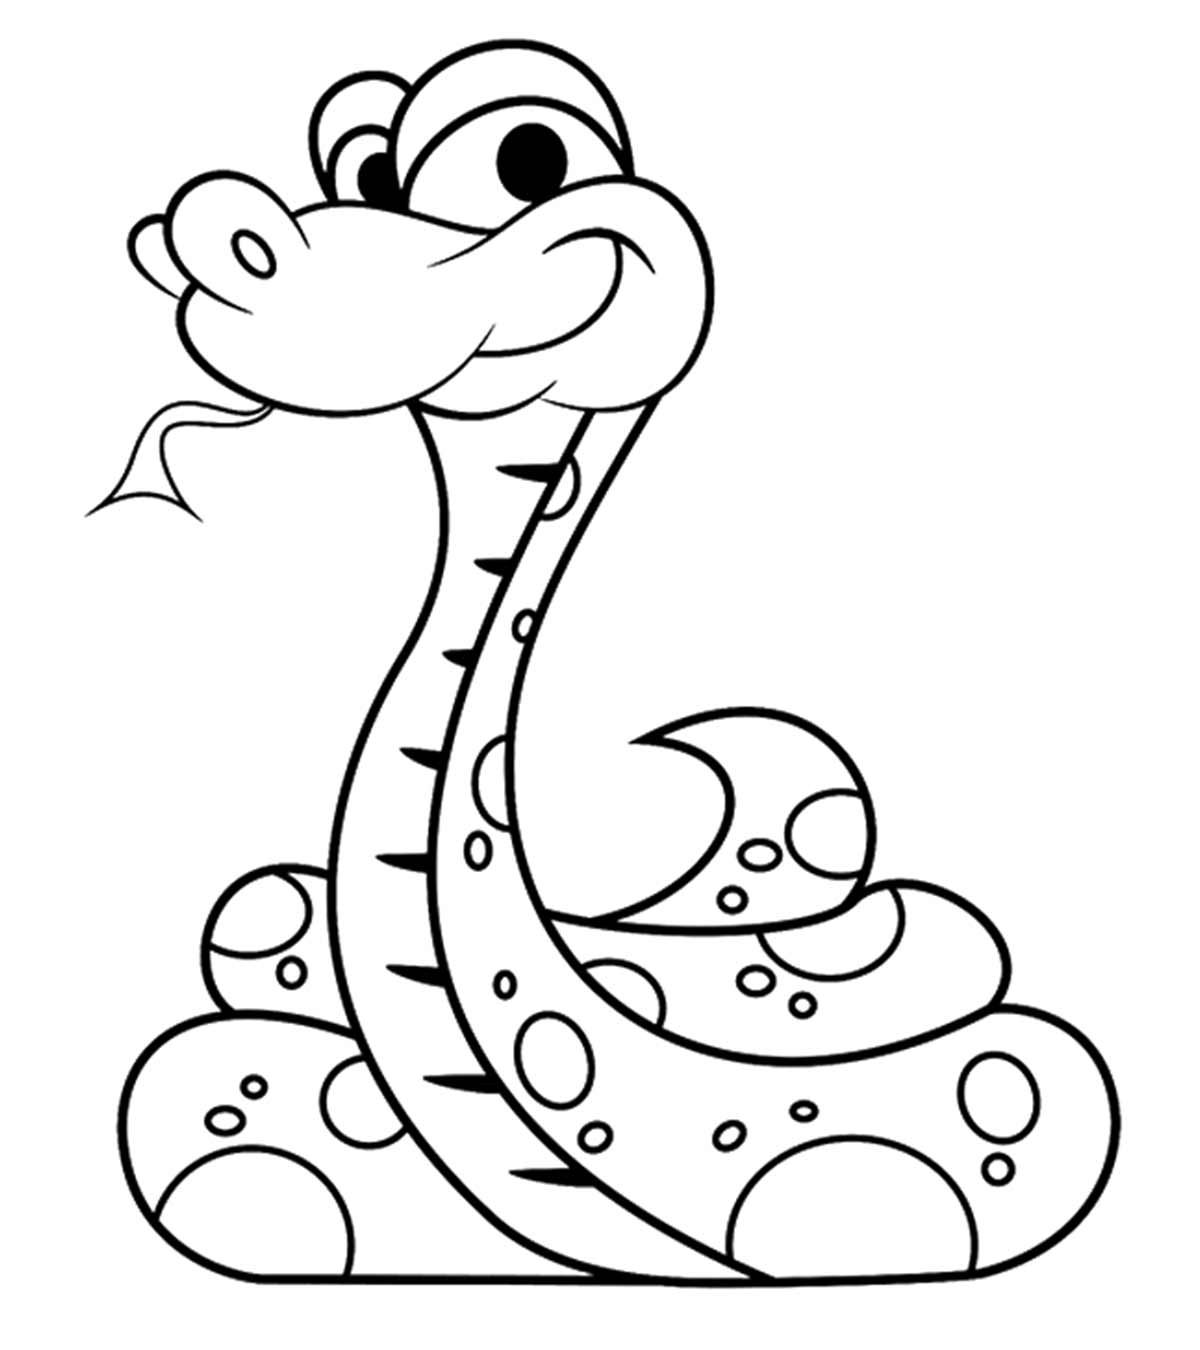 Top 25 Free Printable Snake Coloring Pages Online